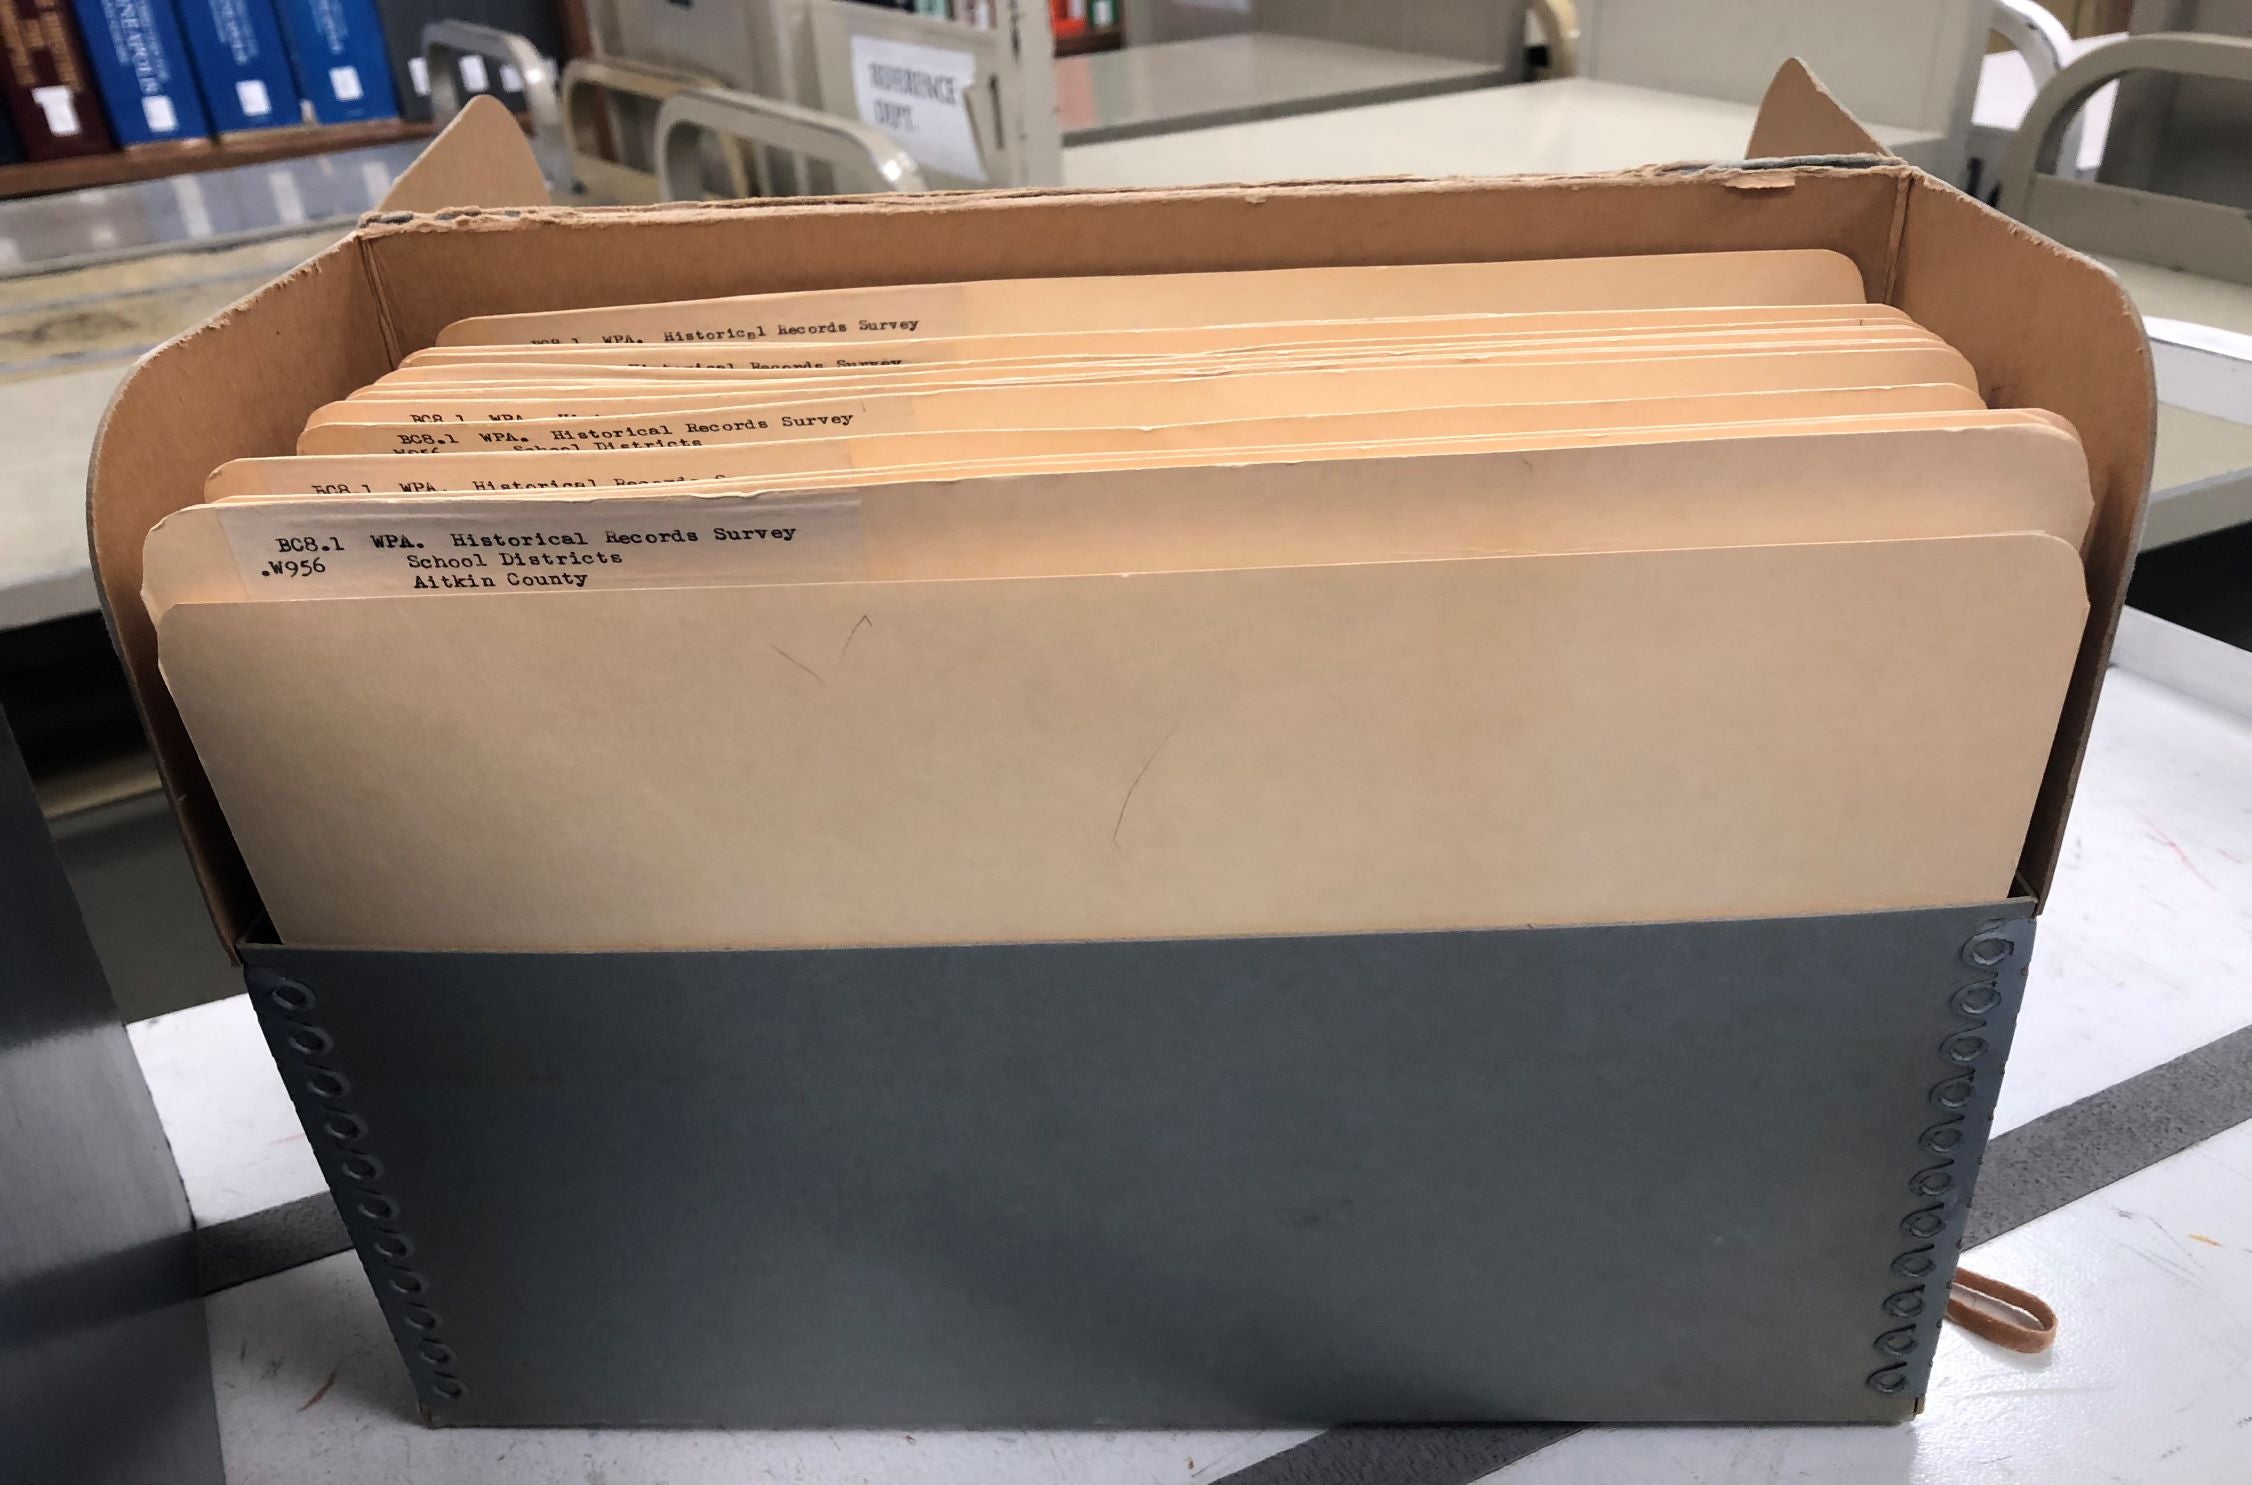 Copy Request (folders from boxes)